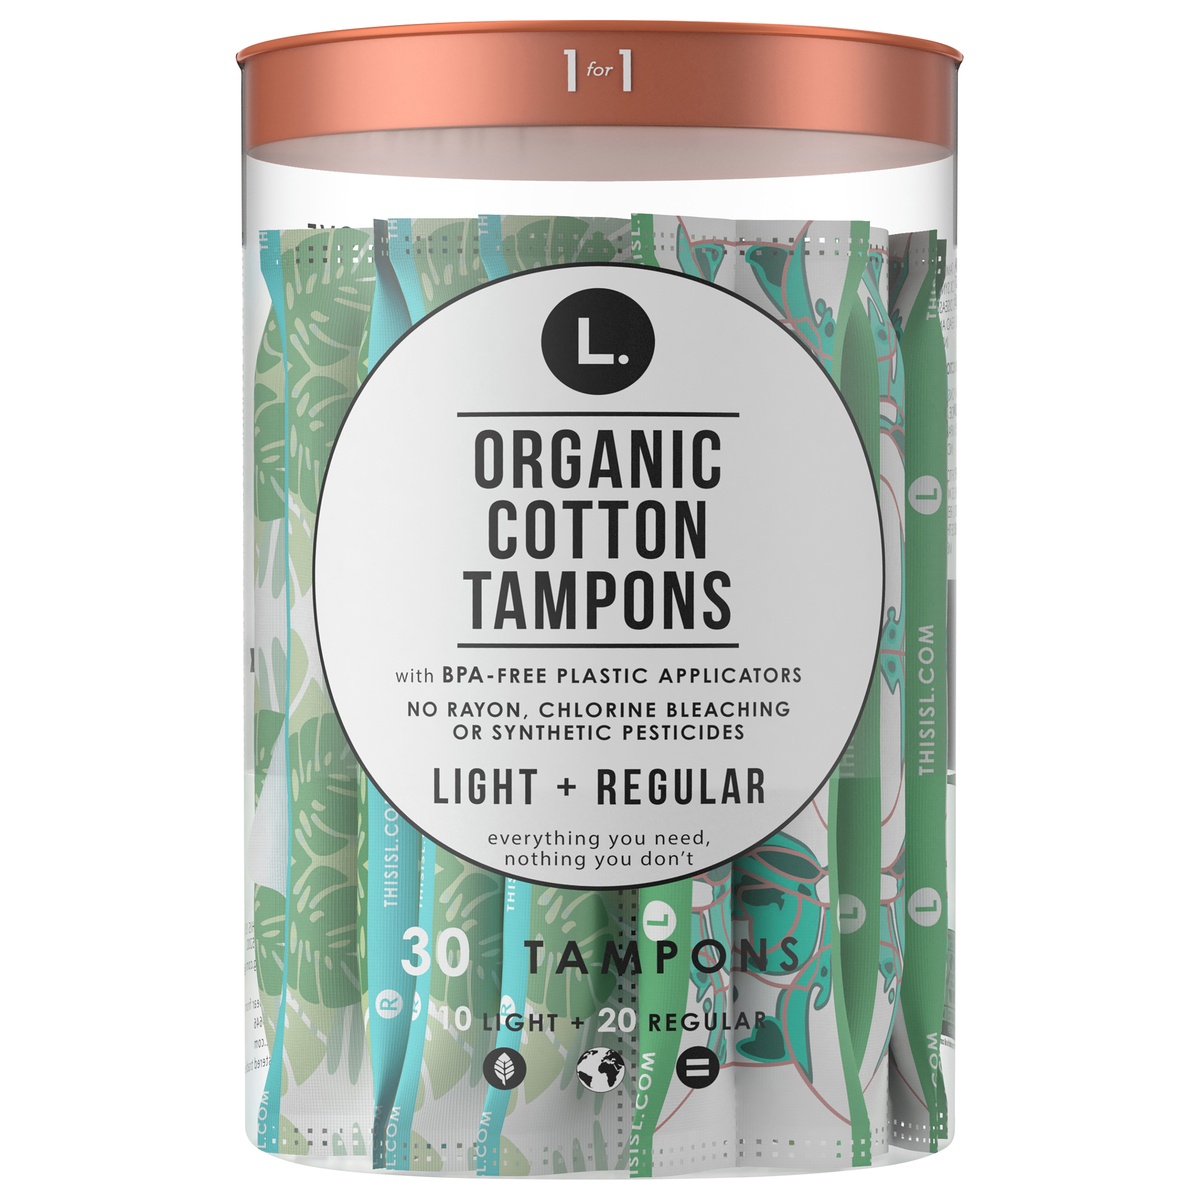 slide 6 of 6, L. Organic Cotton Tampons Light/Regular Absorbency Duo Pack, Free from Chlorine Bleaching, Pesticides, Fragrances, or Dyes, BPA-free Plastic Applicator, 30 Count, 30 ct